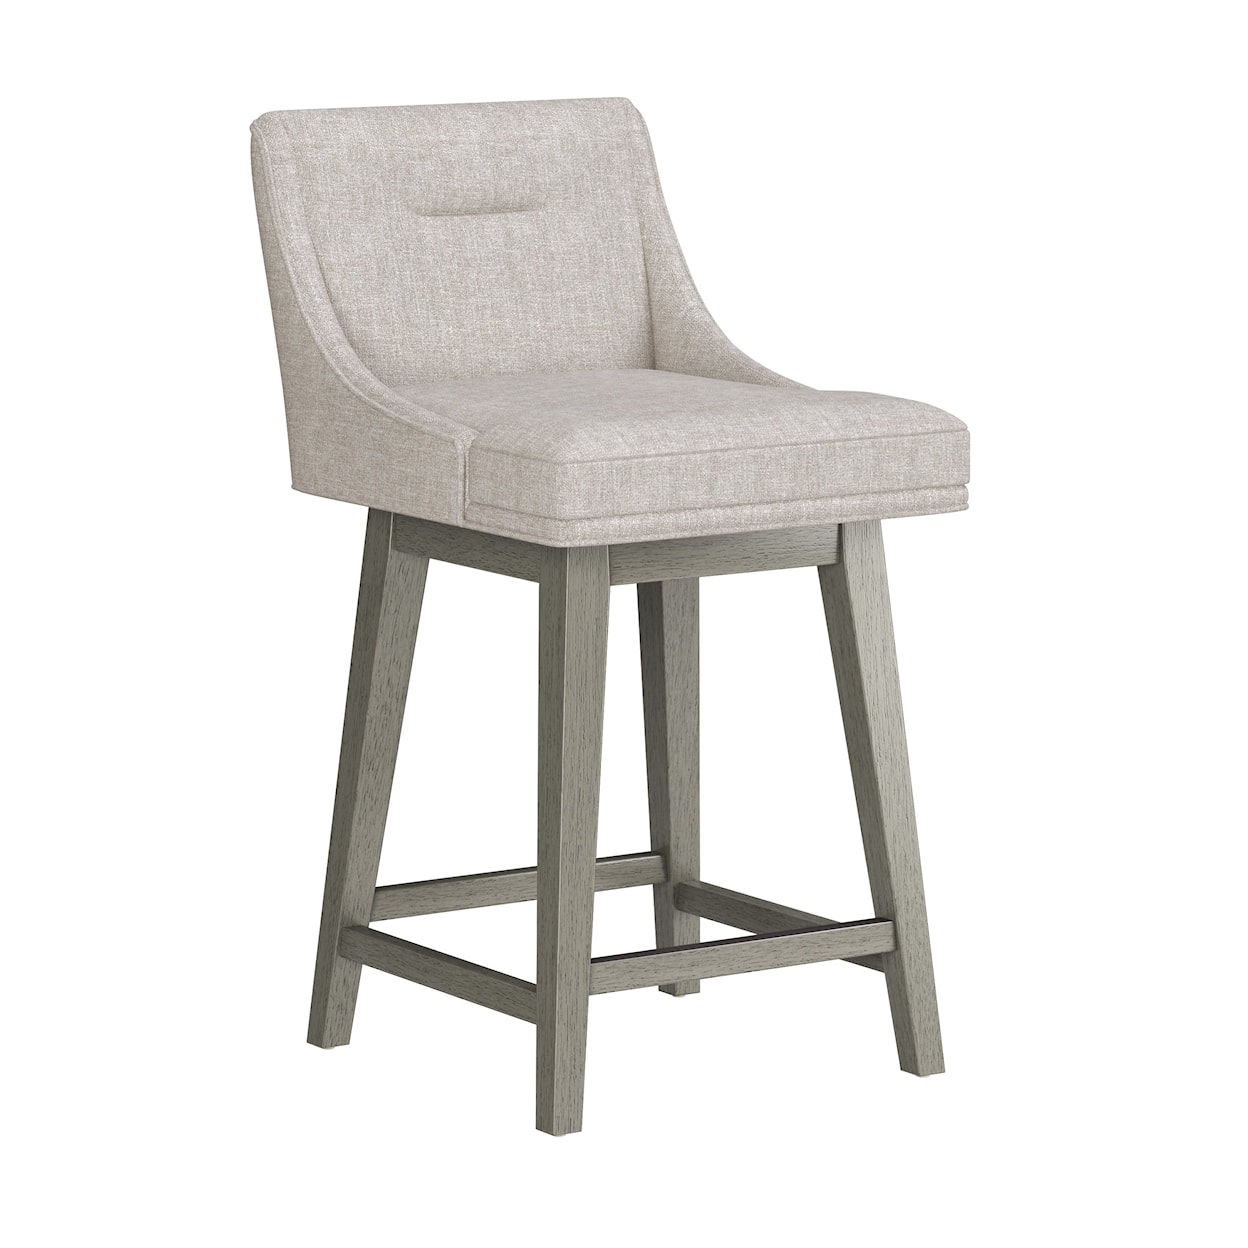 Hillsdale Uniquely Yours Tapered Adjustable Swivel Stool